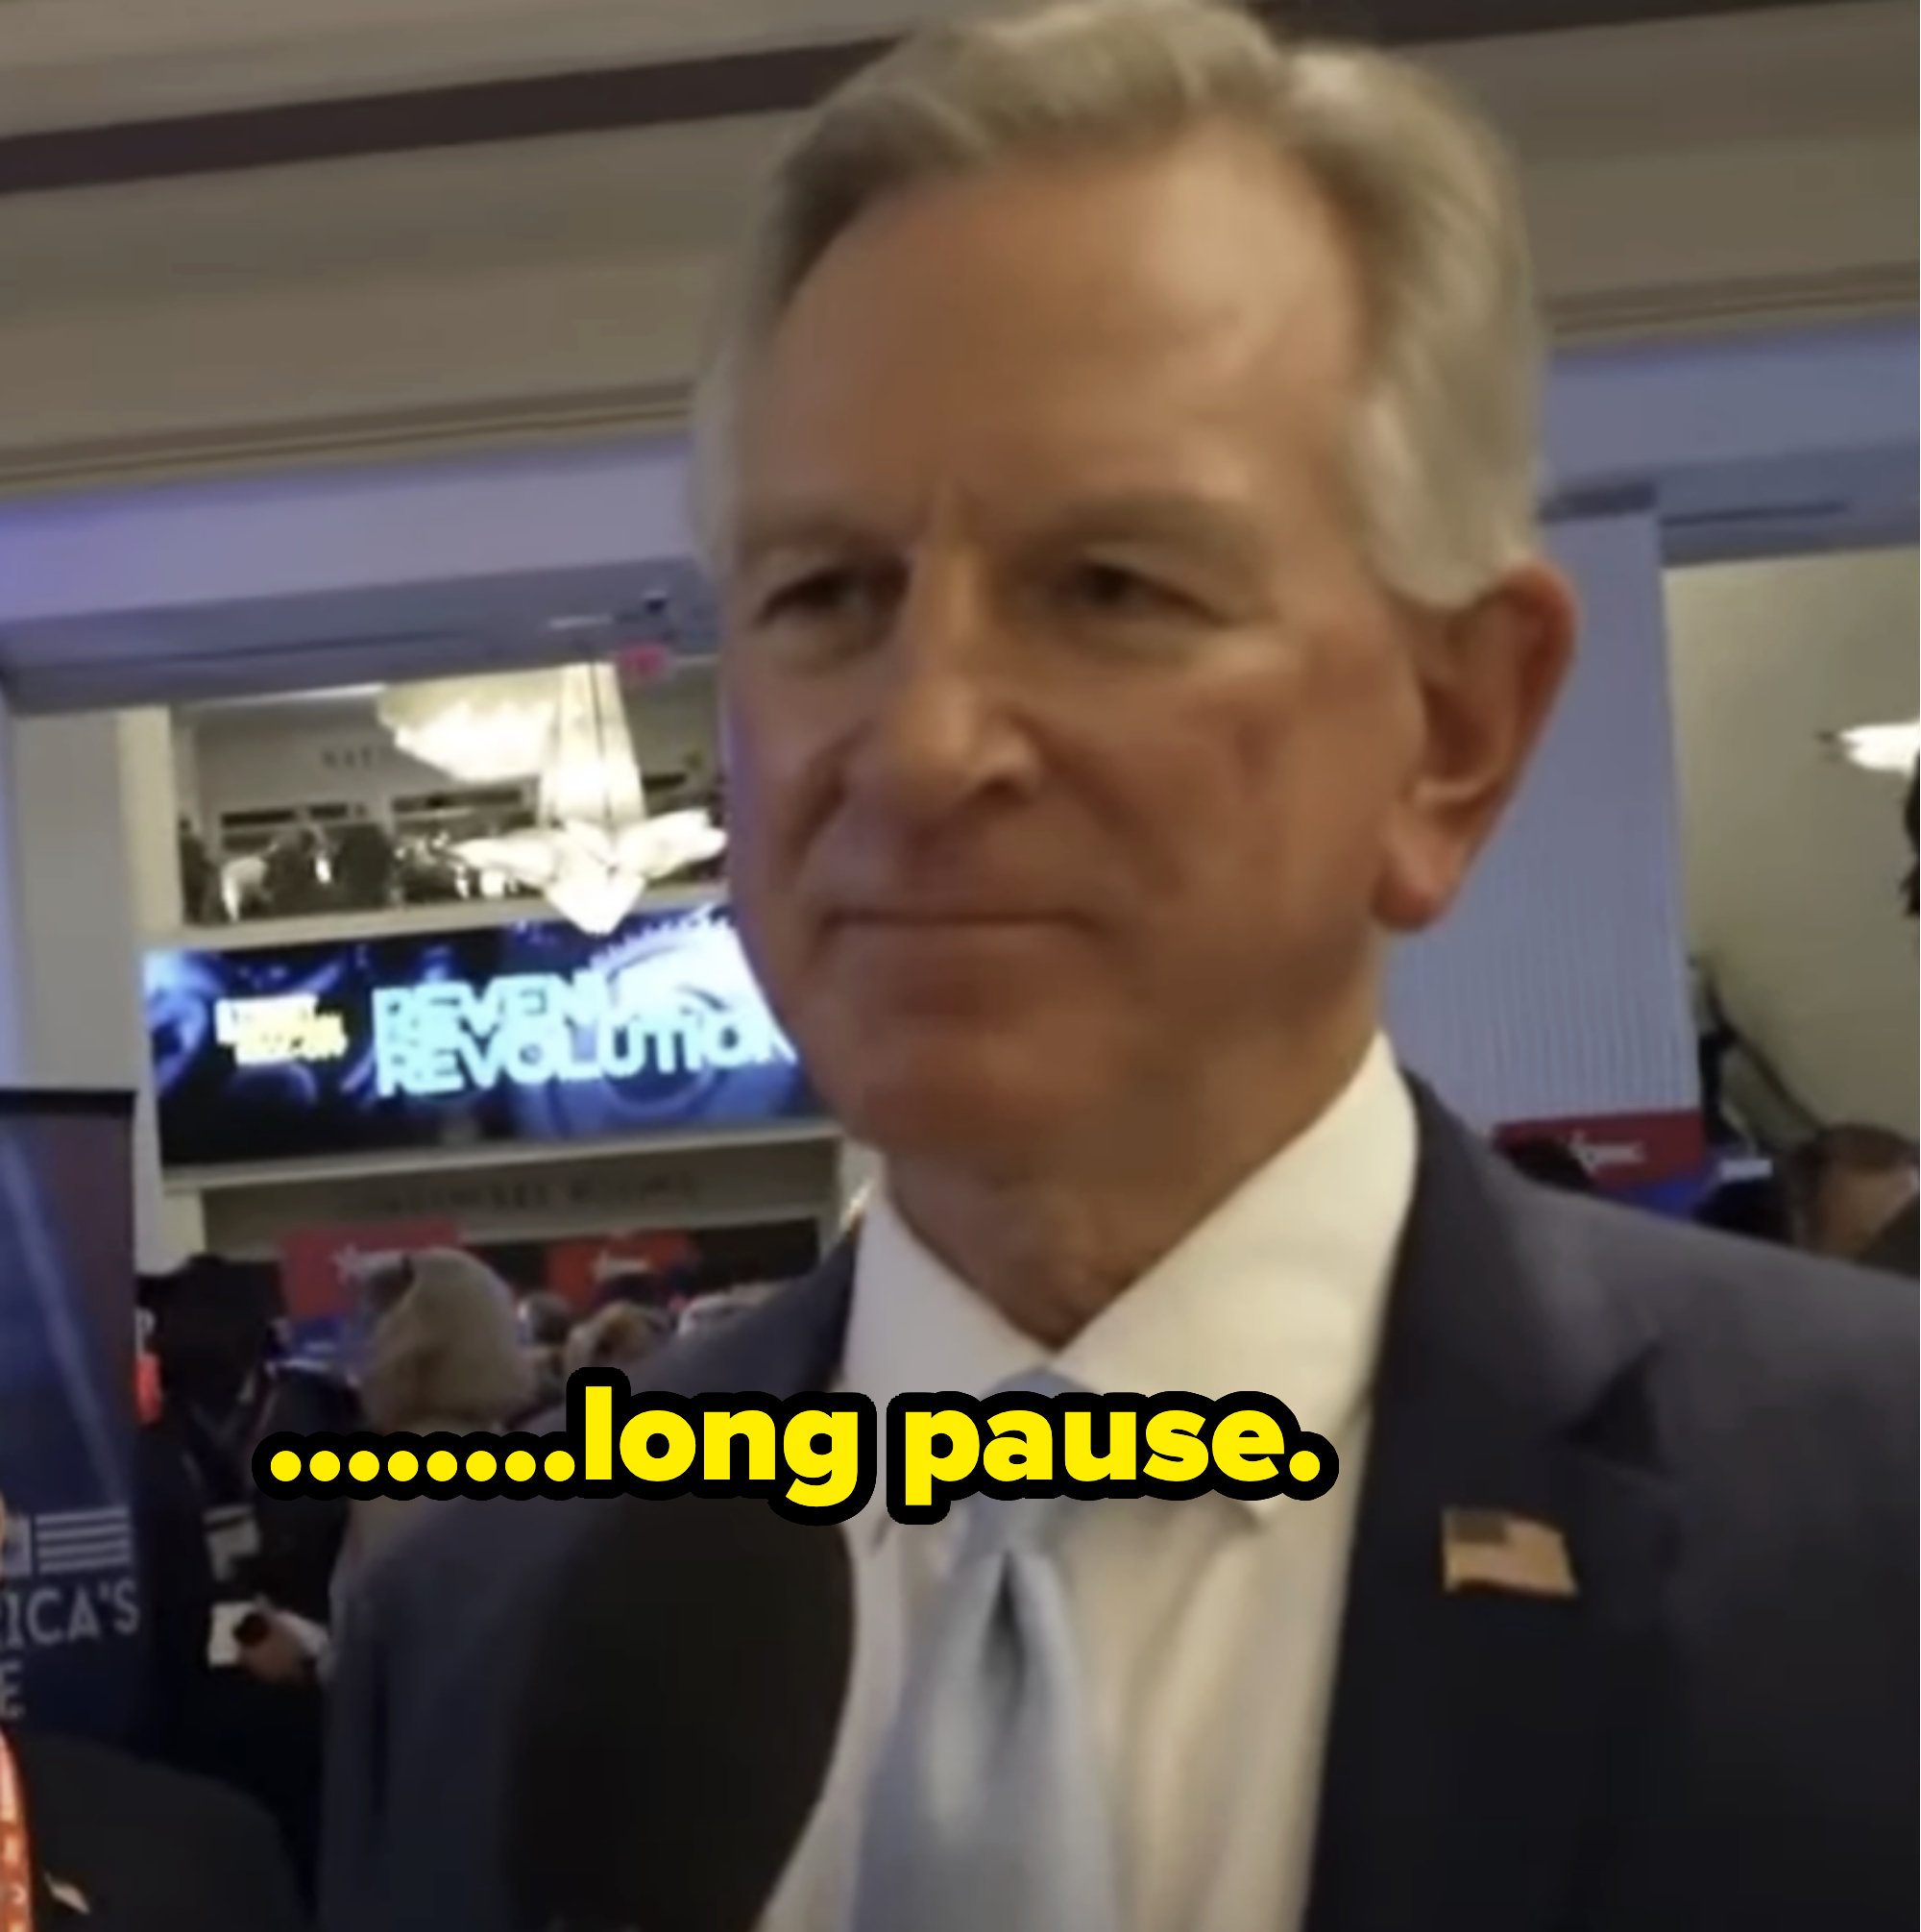 Tommy Tuberville blank stare with caption &quot;......long pause&quot;